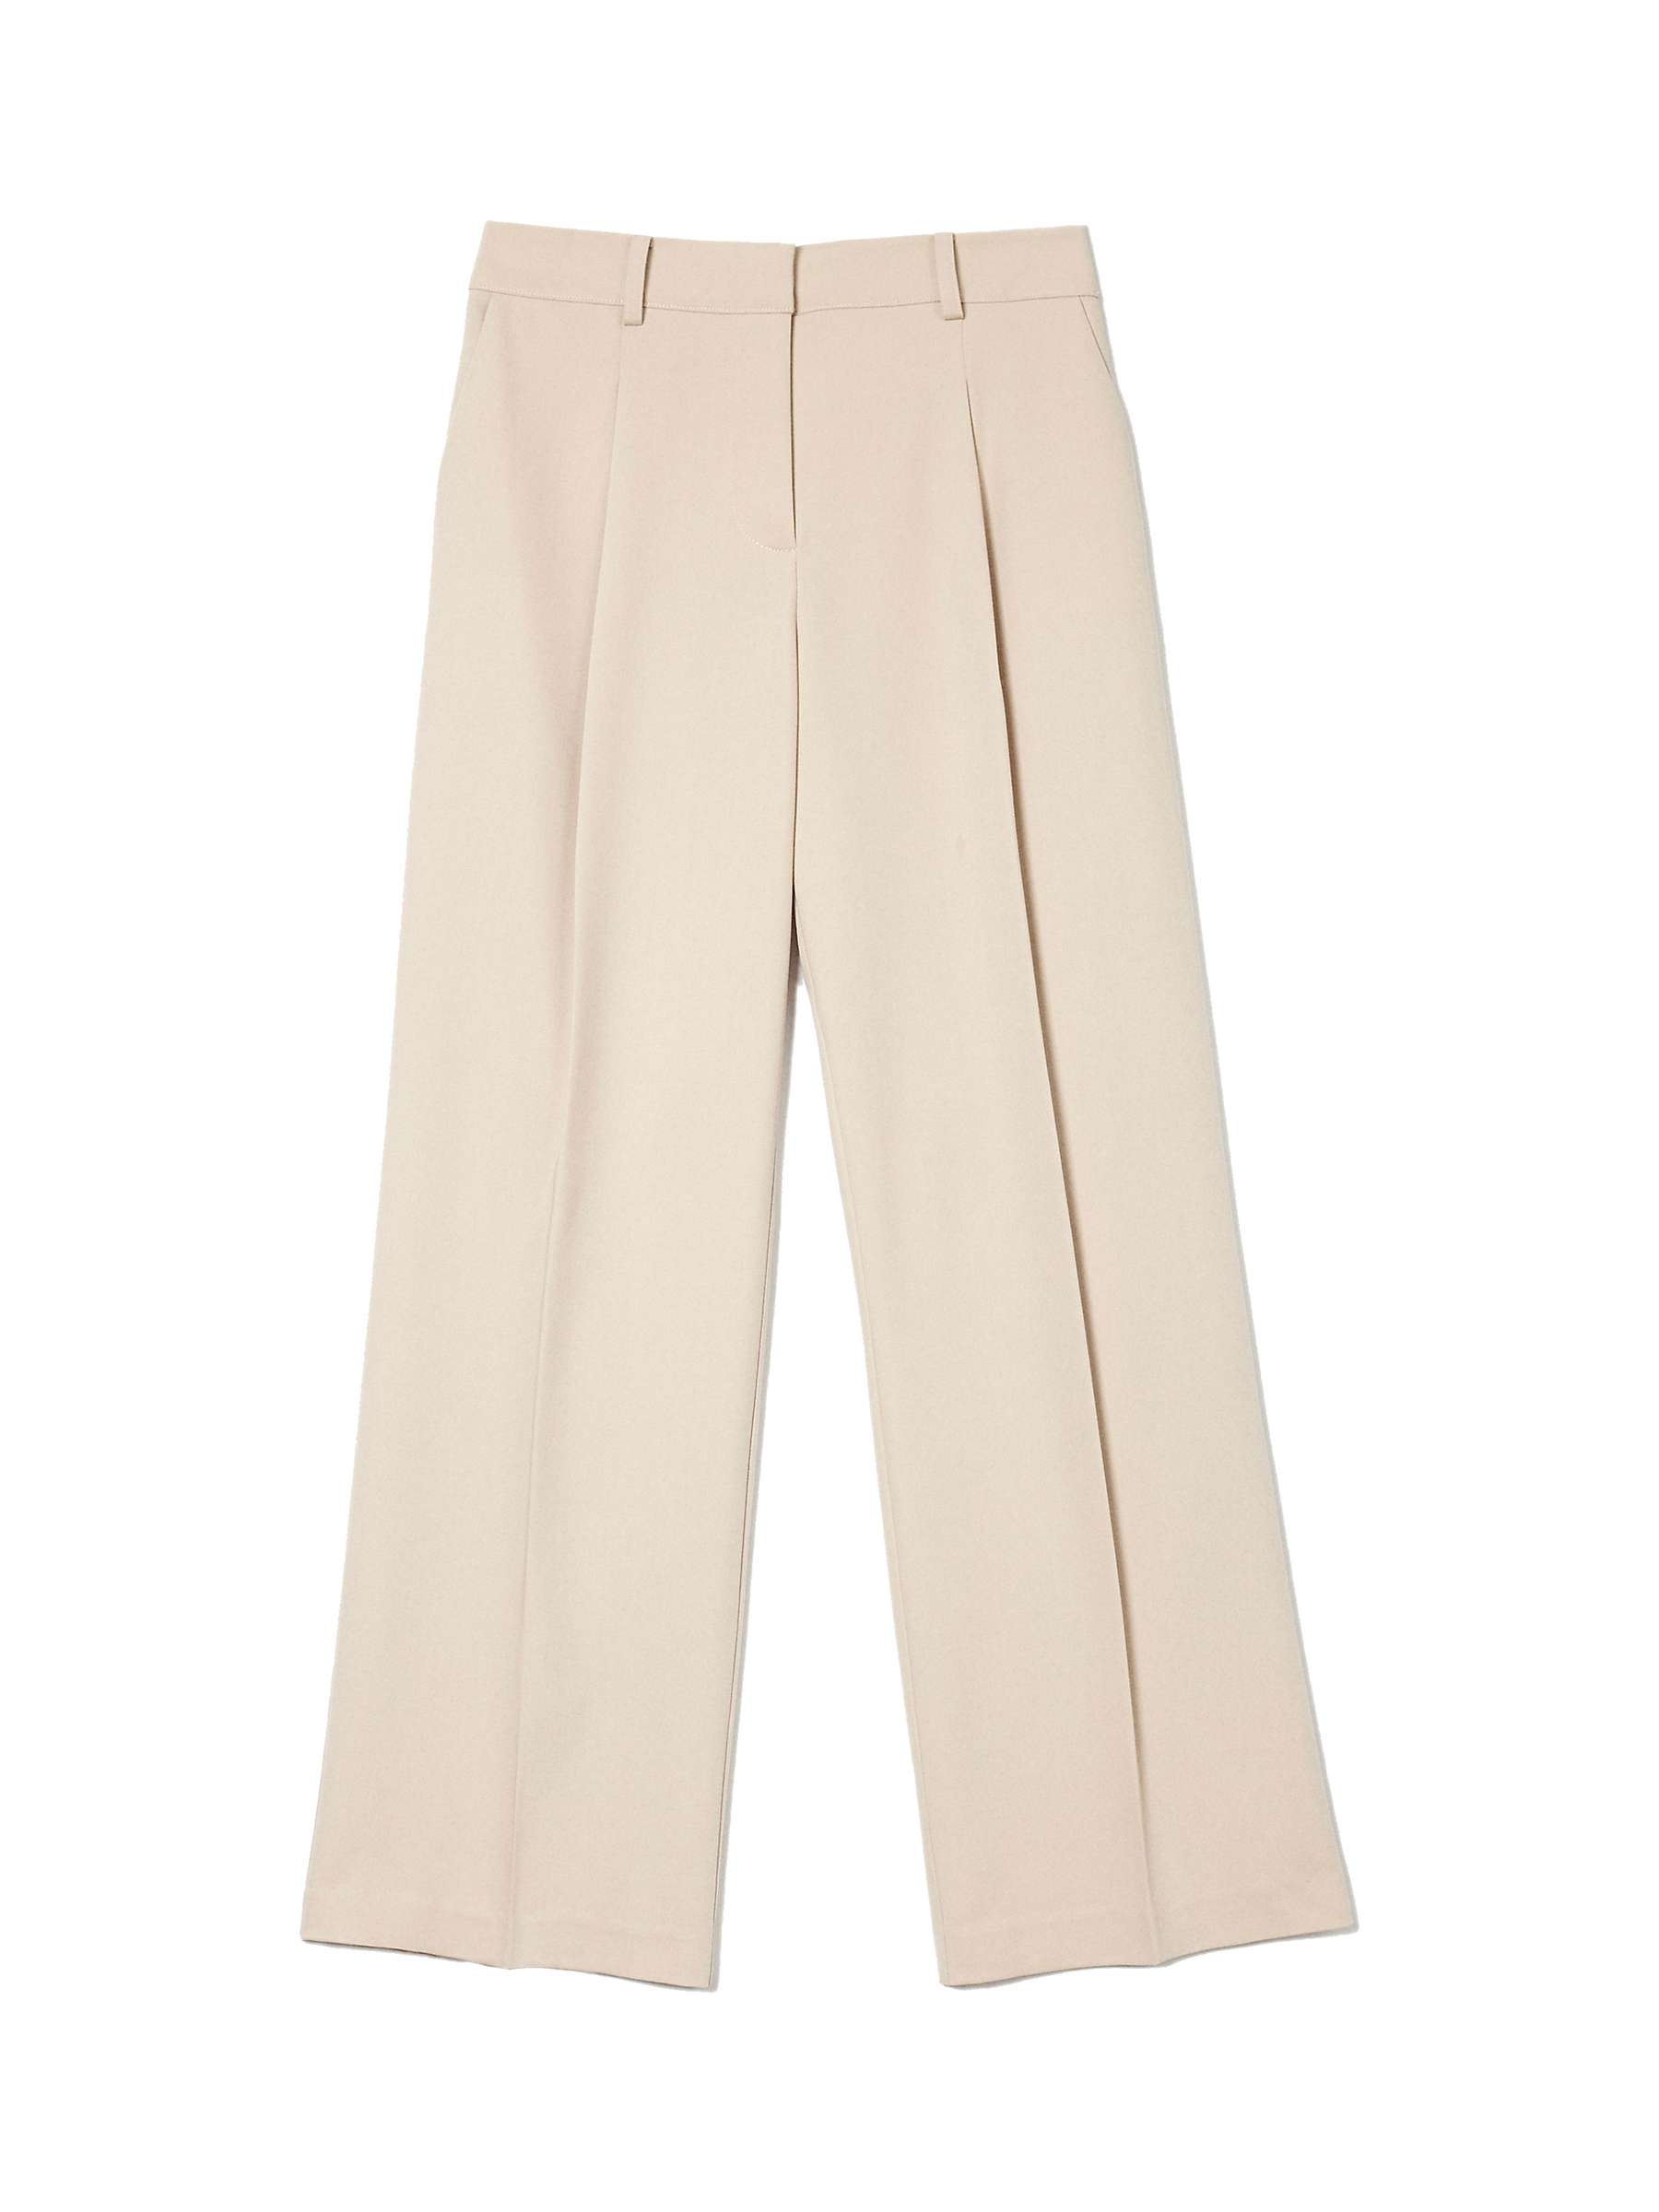 Buy Albaray Pleat Front Tailored Trousers, Stone Online at johnlewis.com